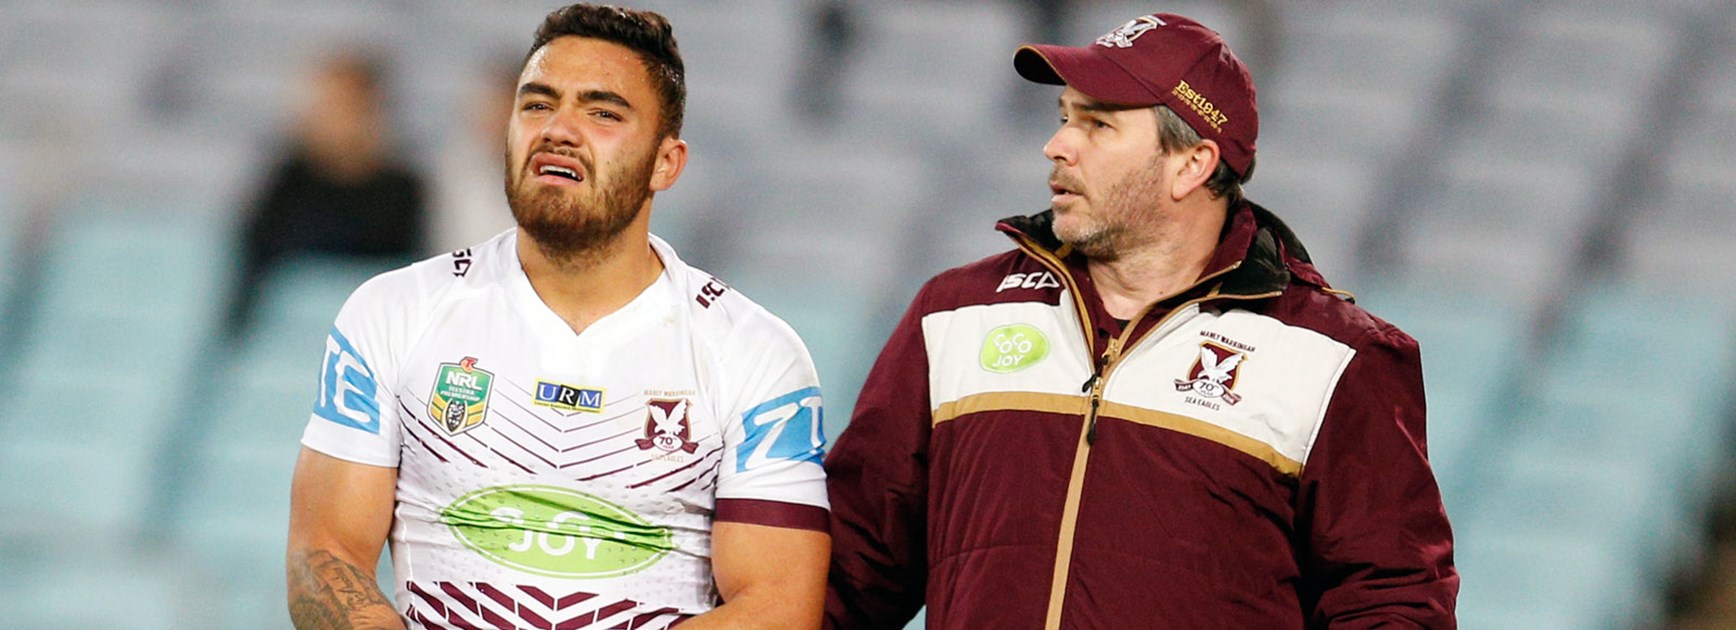 Sea Eagles centre Dylan Walker was injured against the Bulldogs in Round 23.